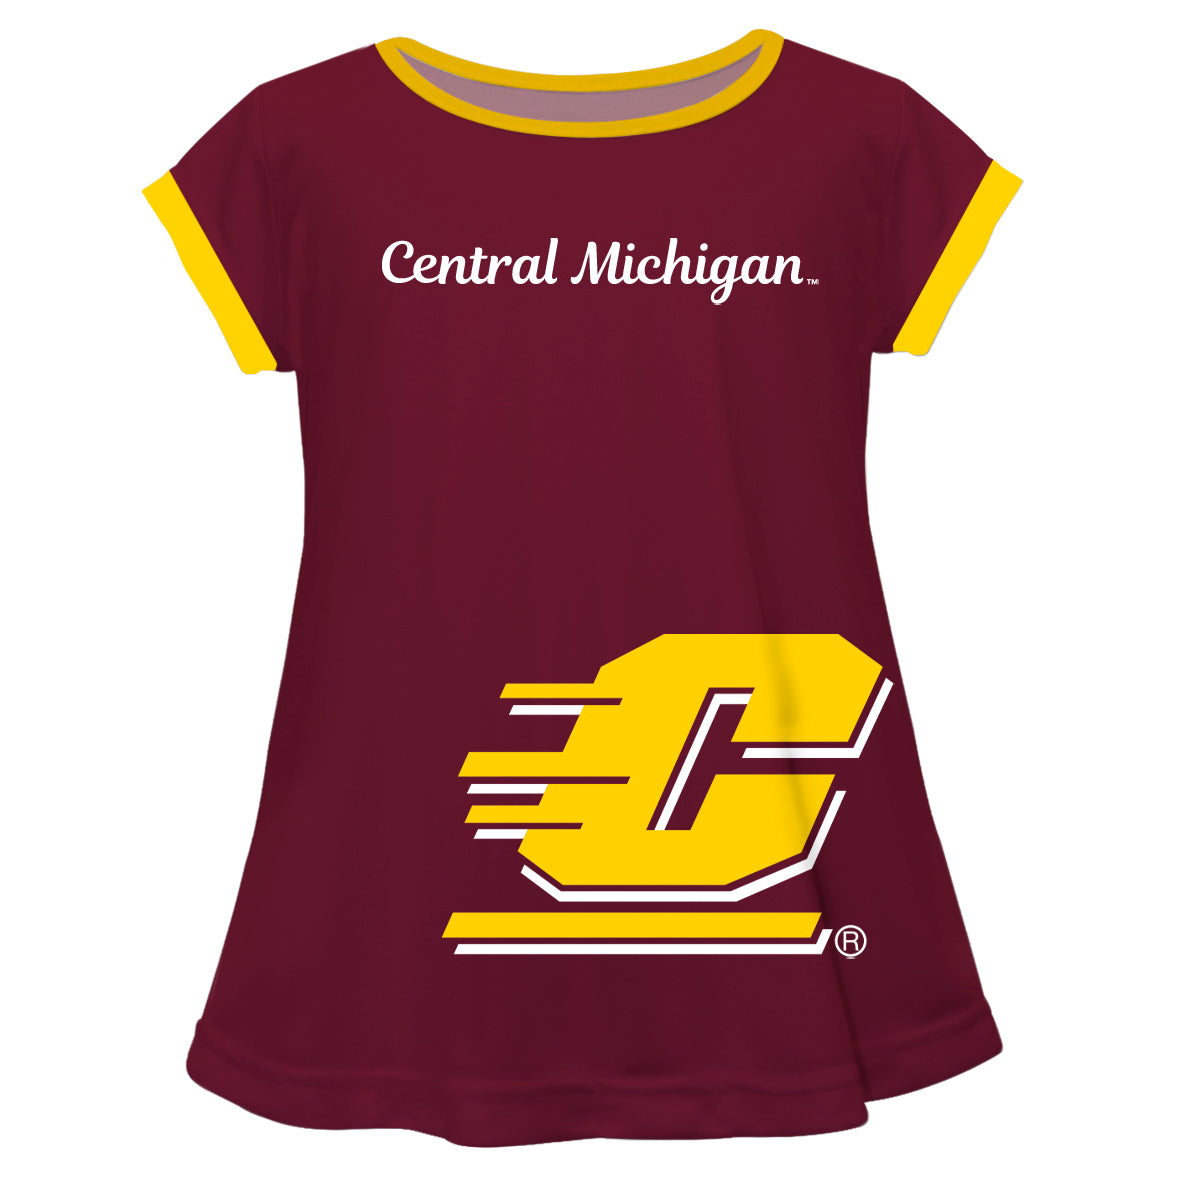 Central Michigan Chippewas Maroon and Yellow Short Sleeve Girls Laurie Top by Vive La Fete